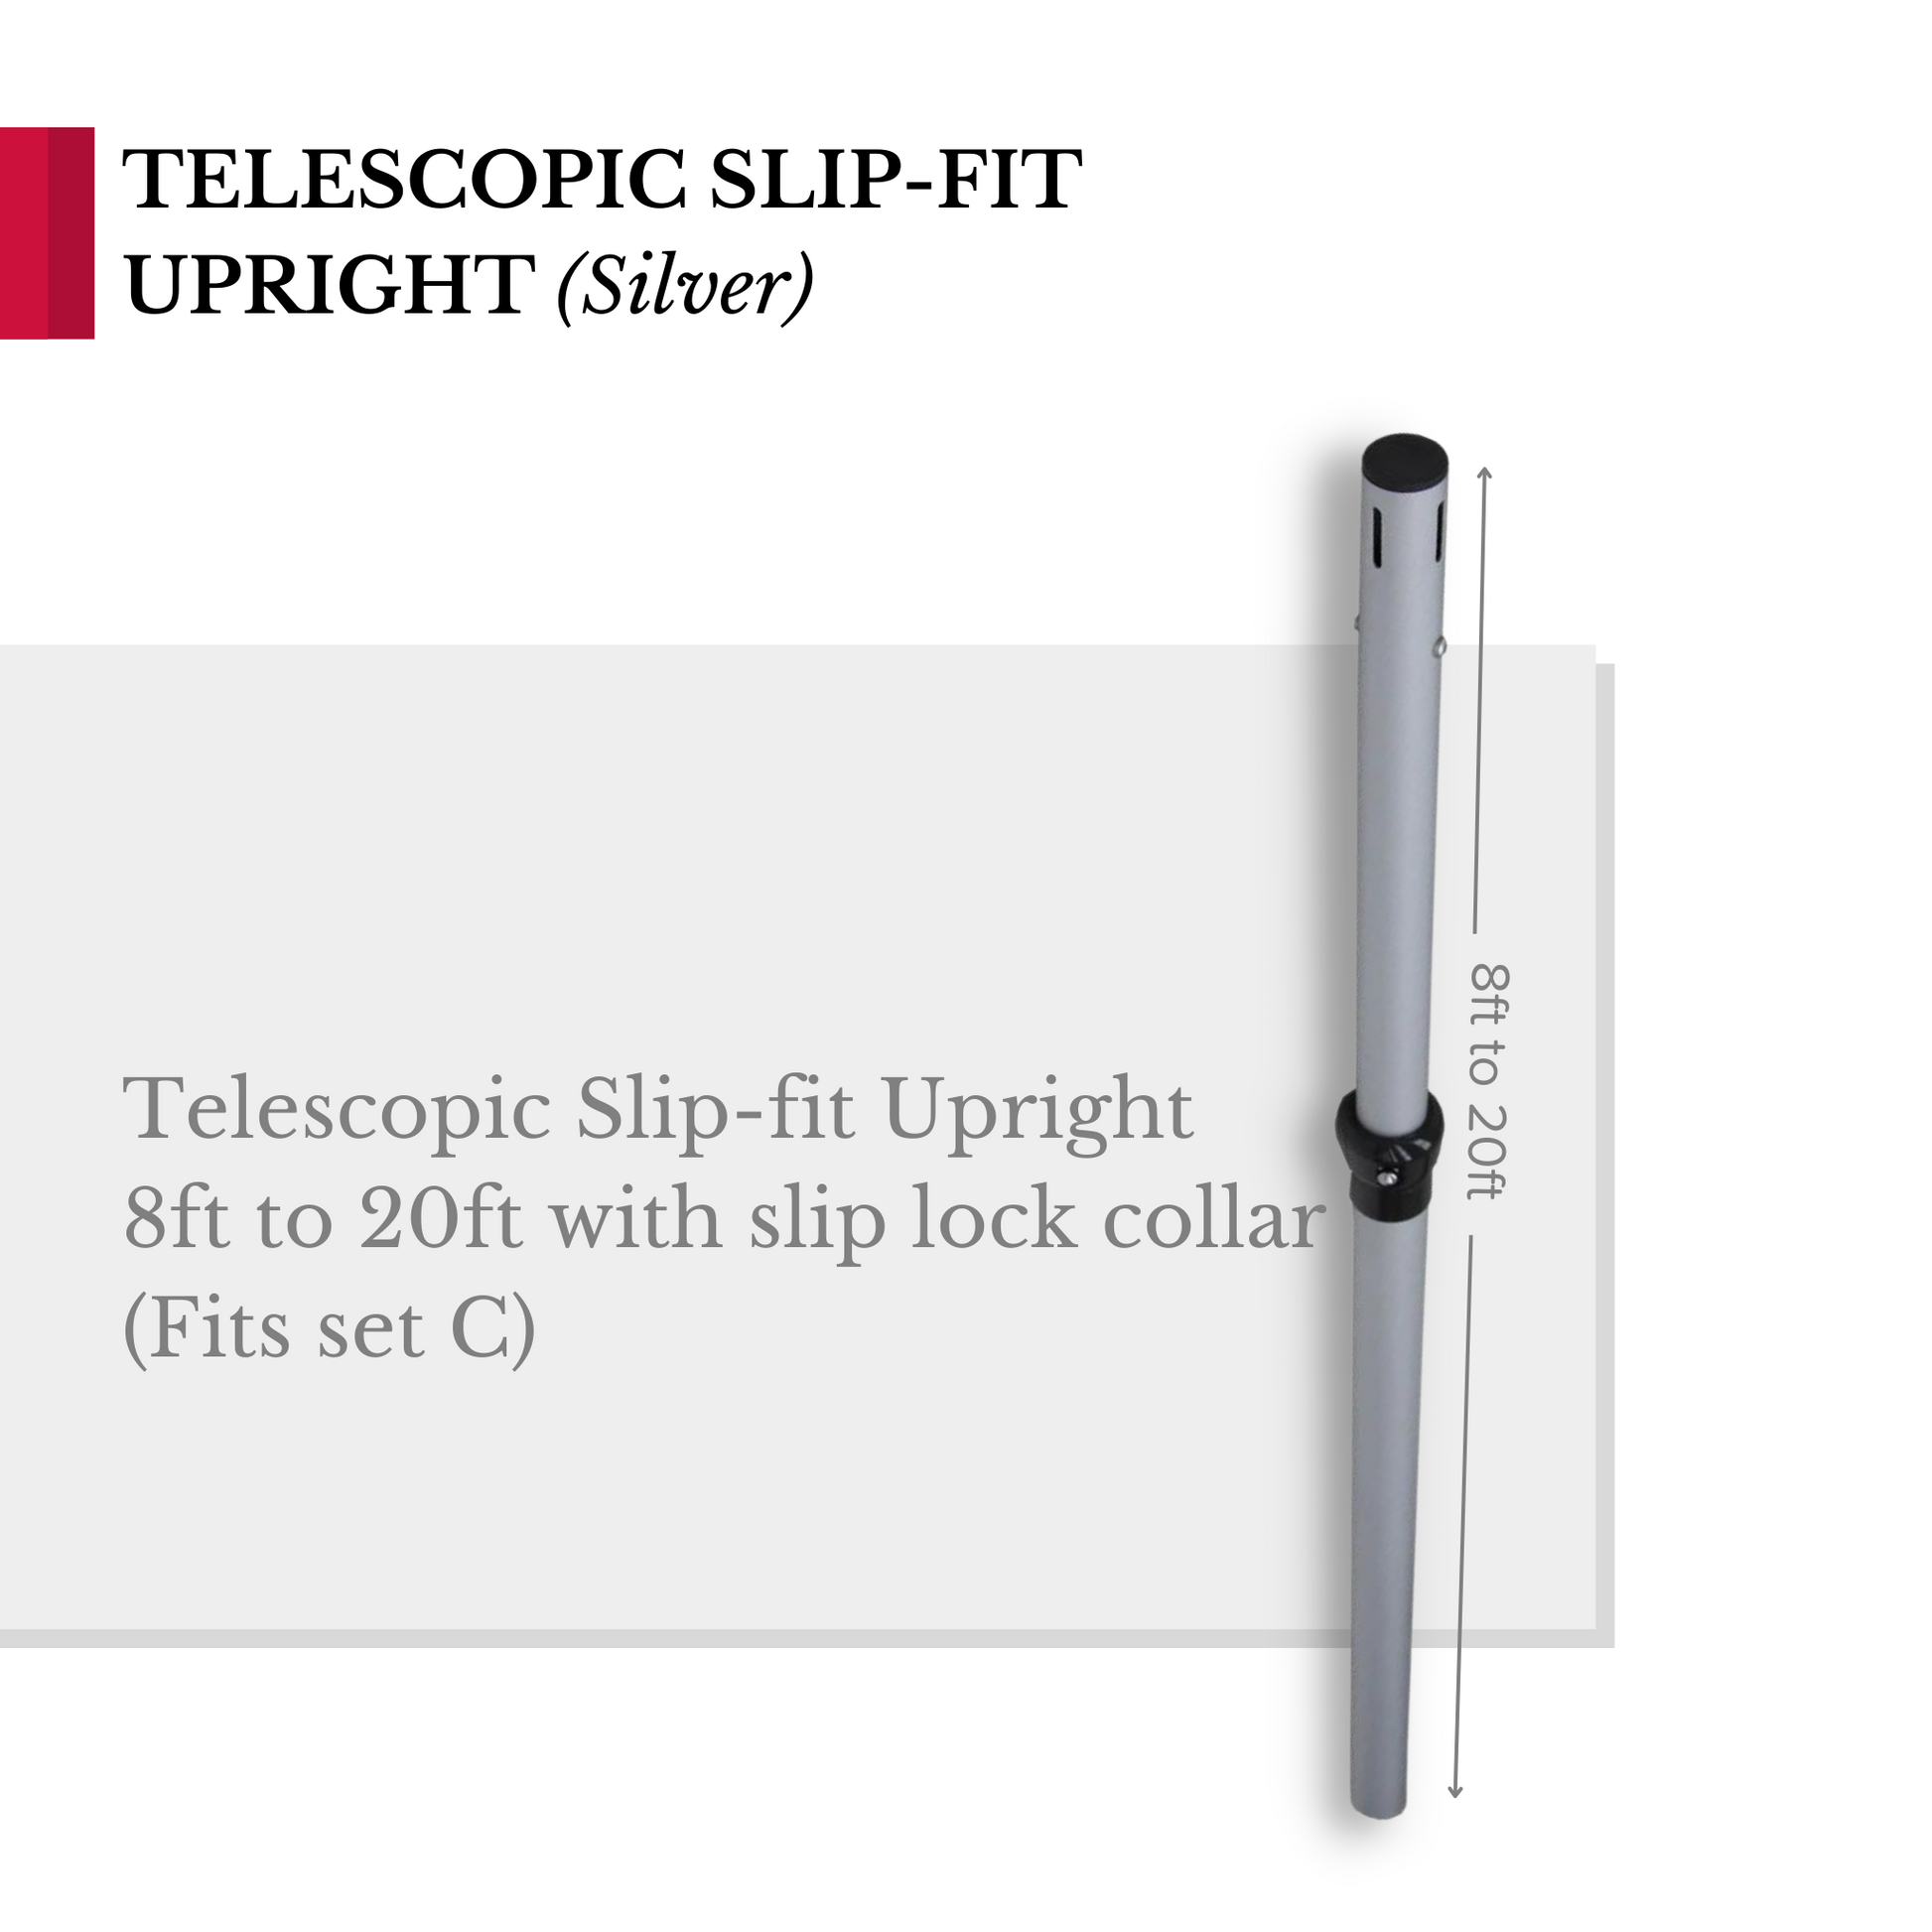 Telescopic Slip-fit Upright 8ft to 20ft with slip lock collar (Fits set C)